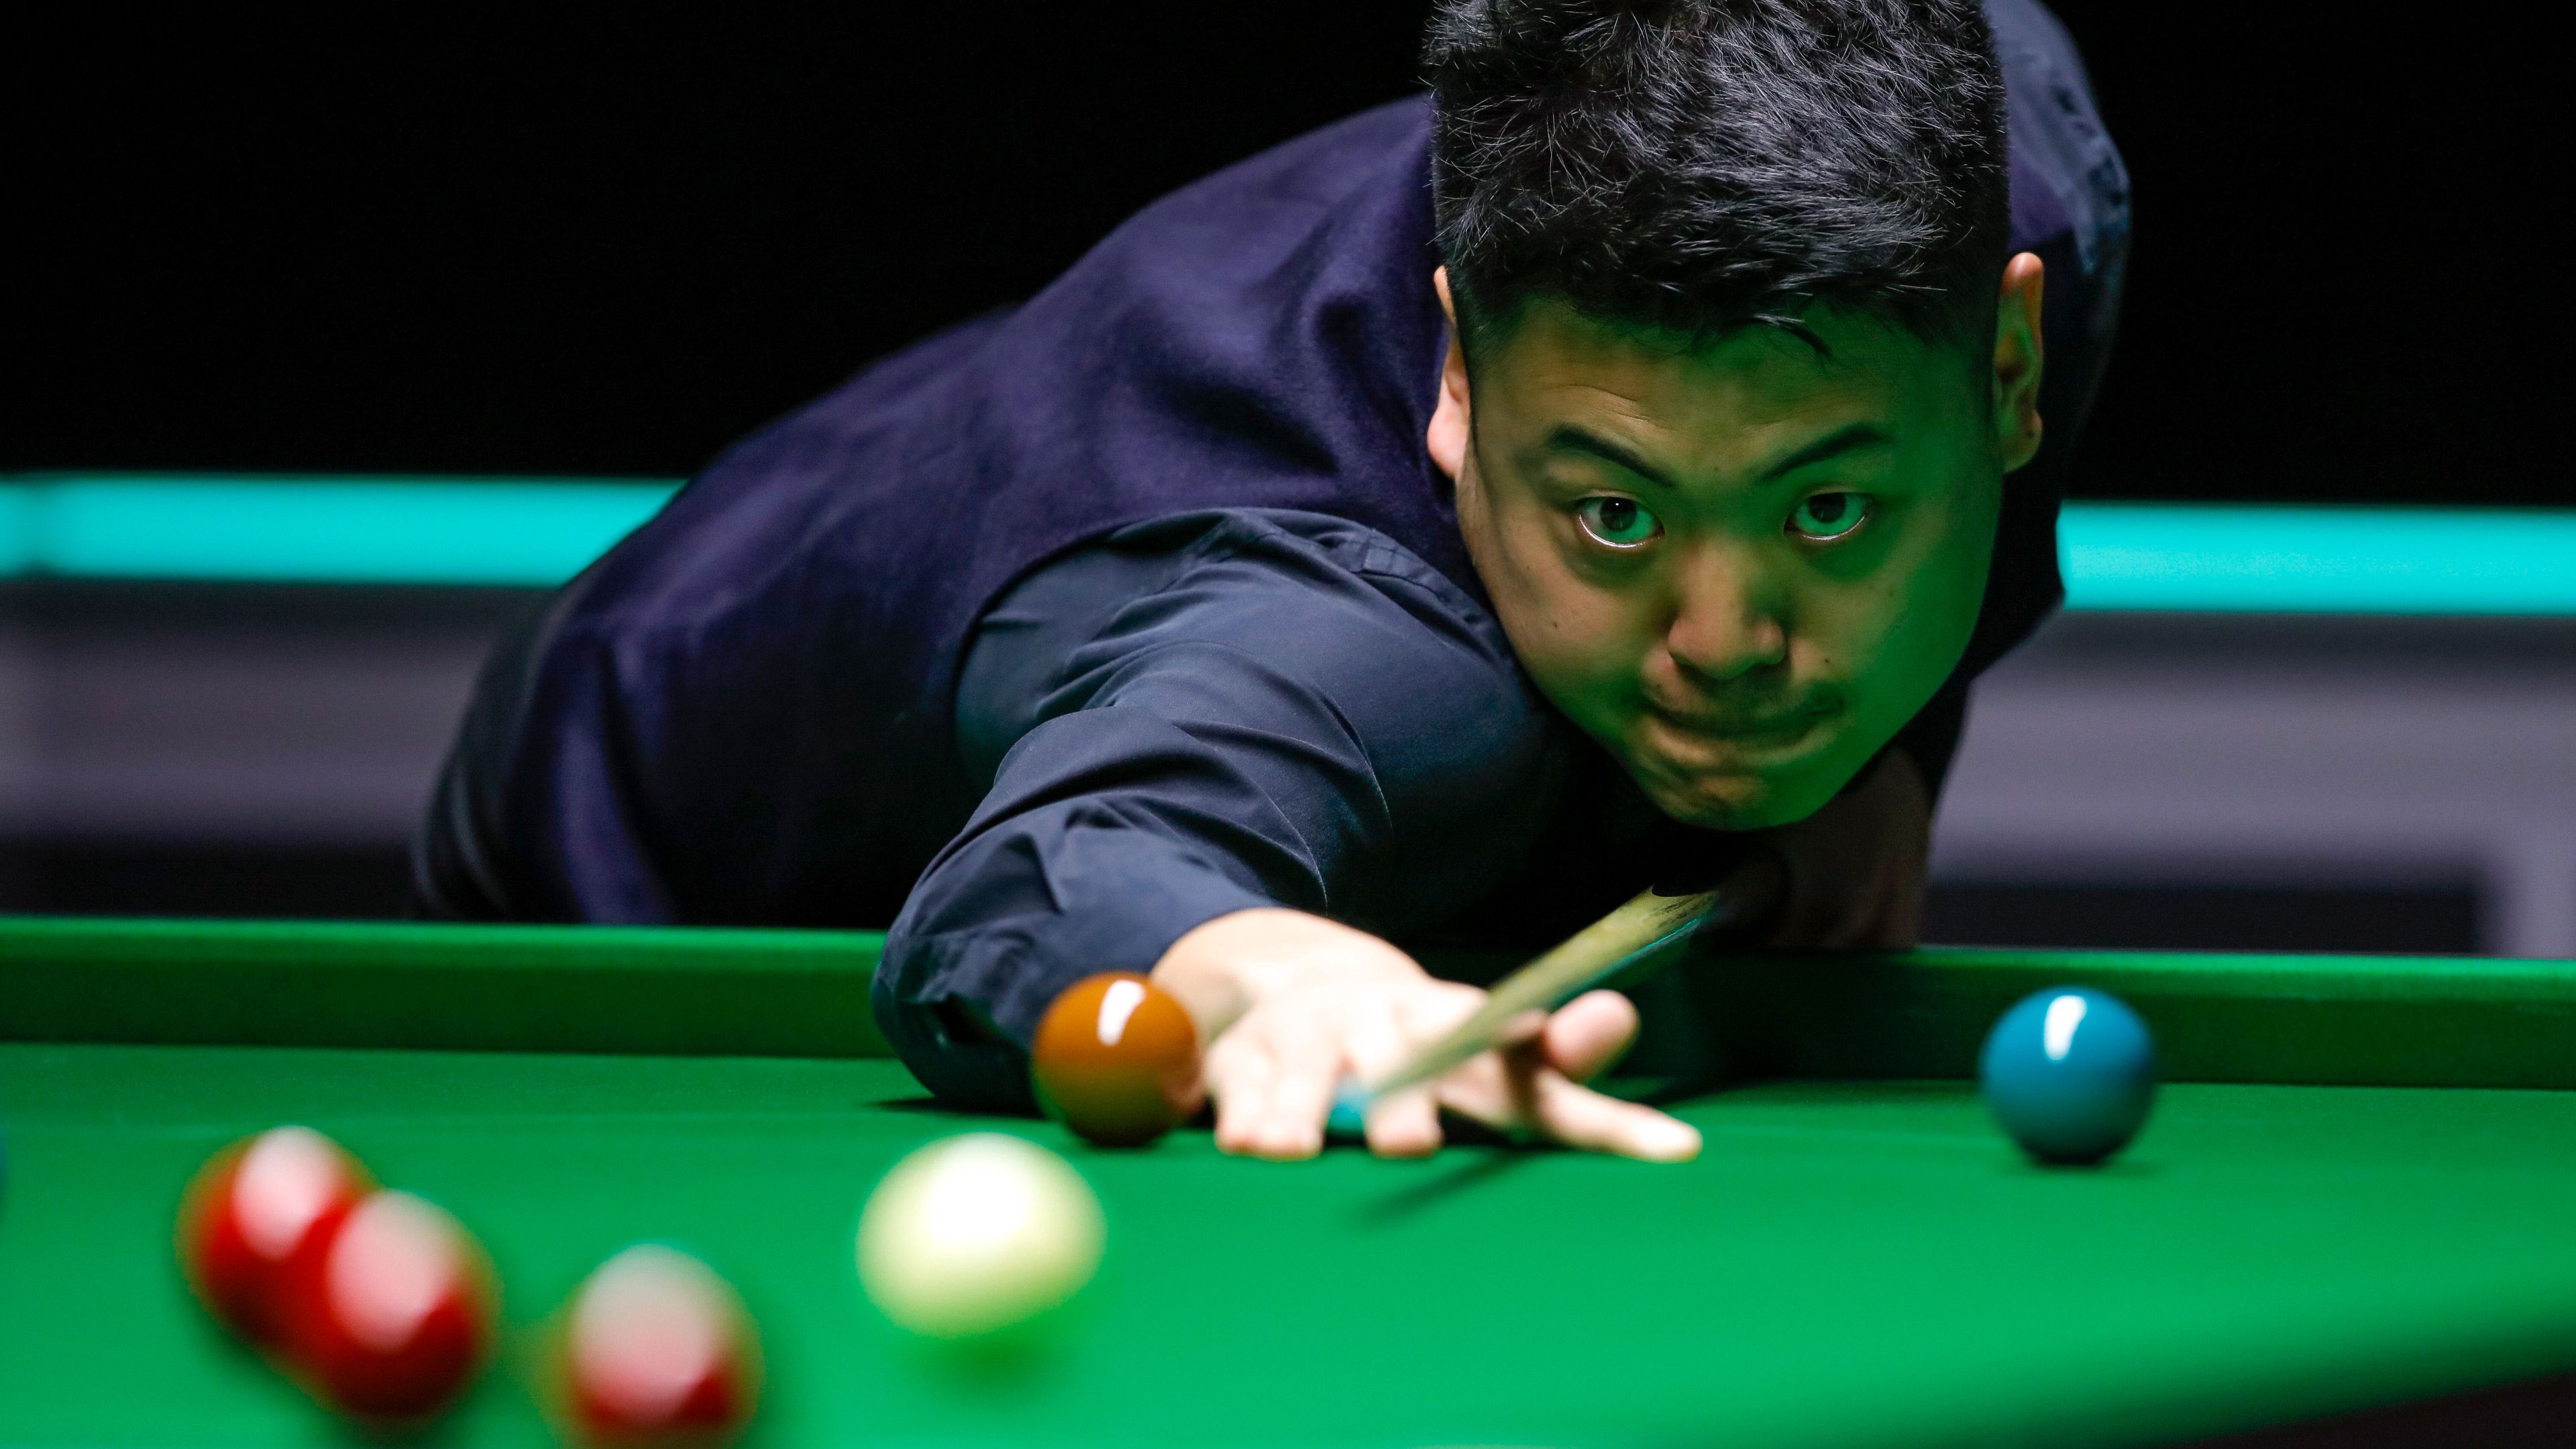 Liang Wenbo of China competes during the Snooker UK Championship 2019 first round match with Dominic Dale of Wales in York, Britain on Nov. 26, 2019. (Photo by Xinhua/Han Yan via Getty)